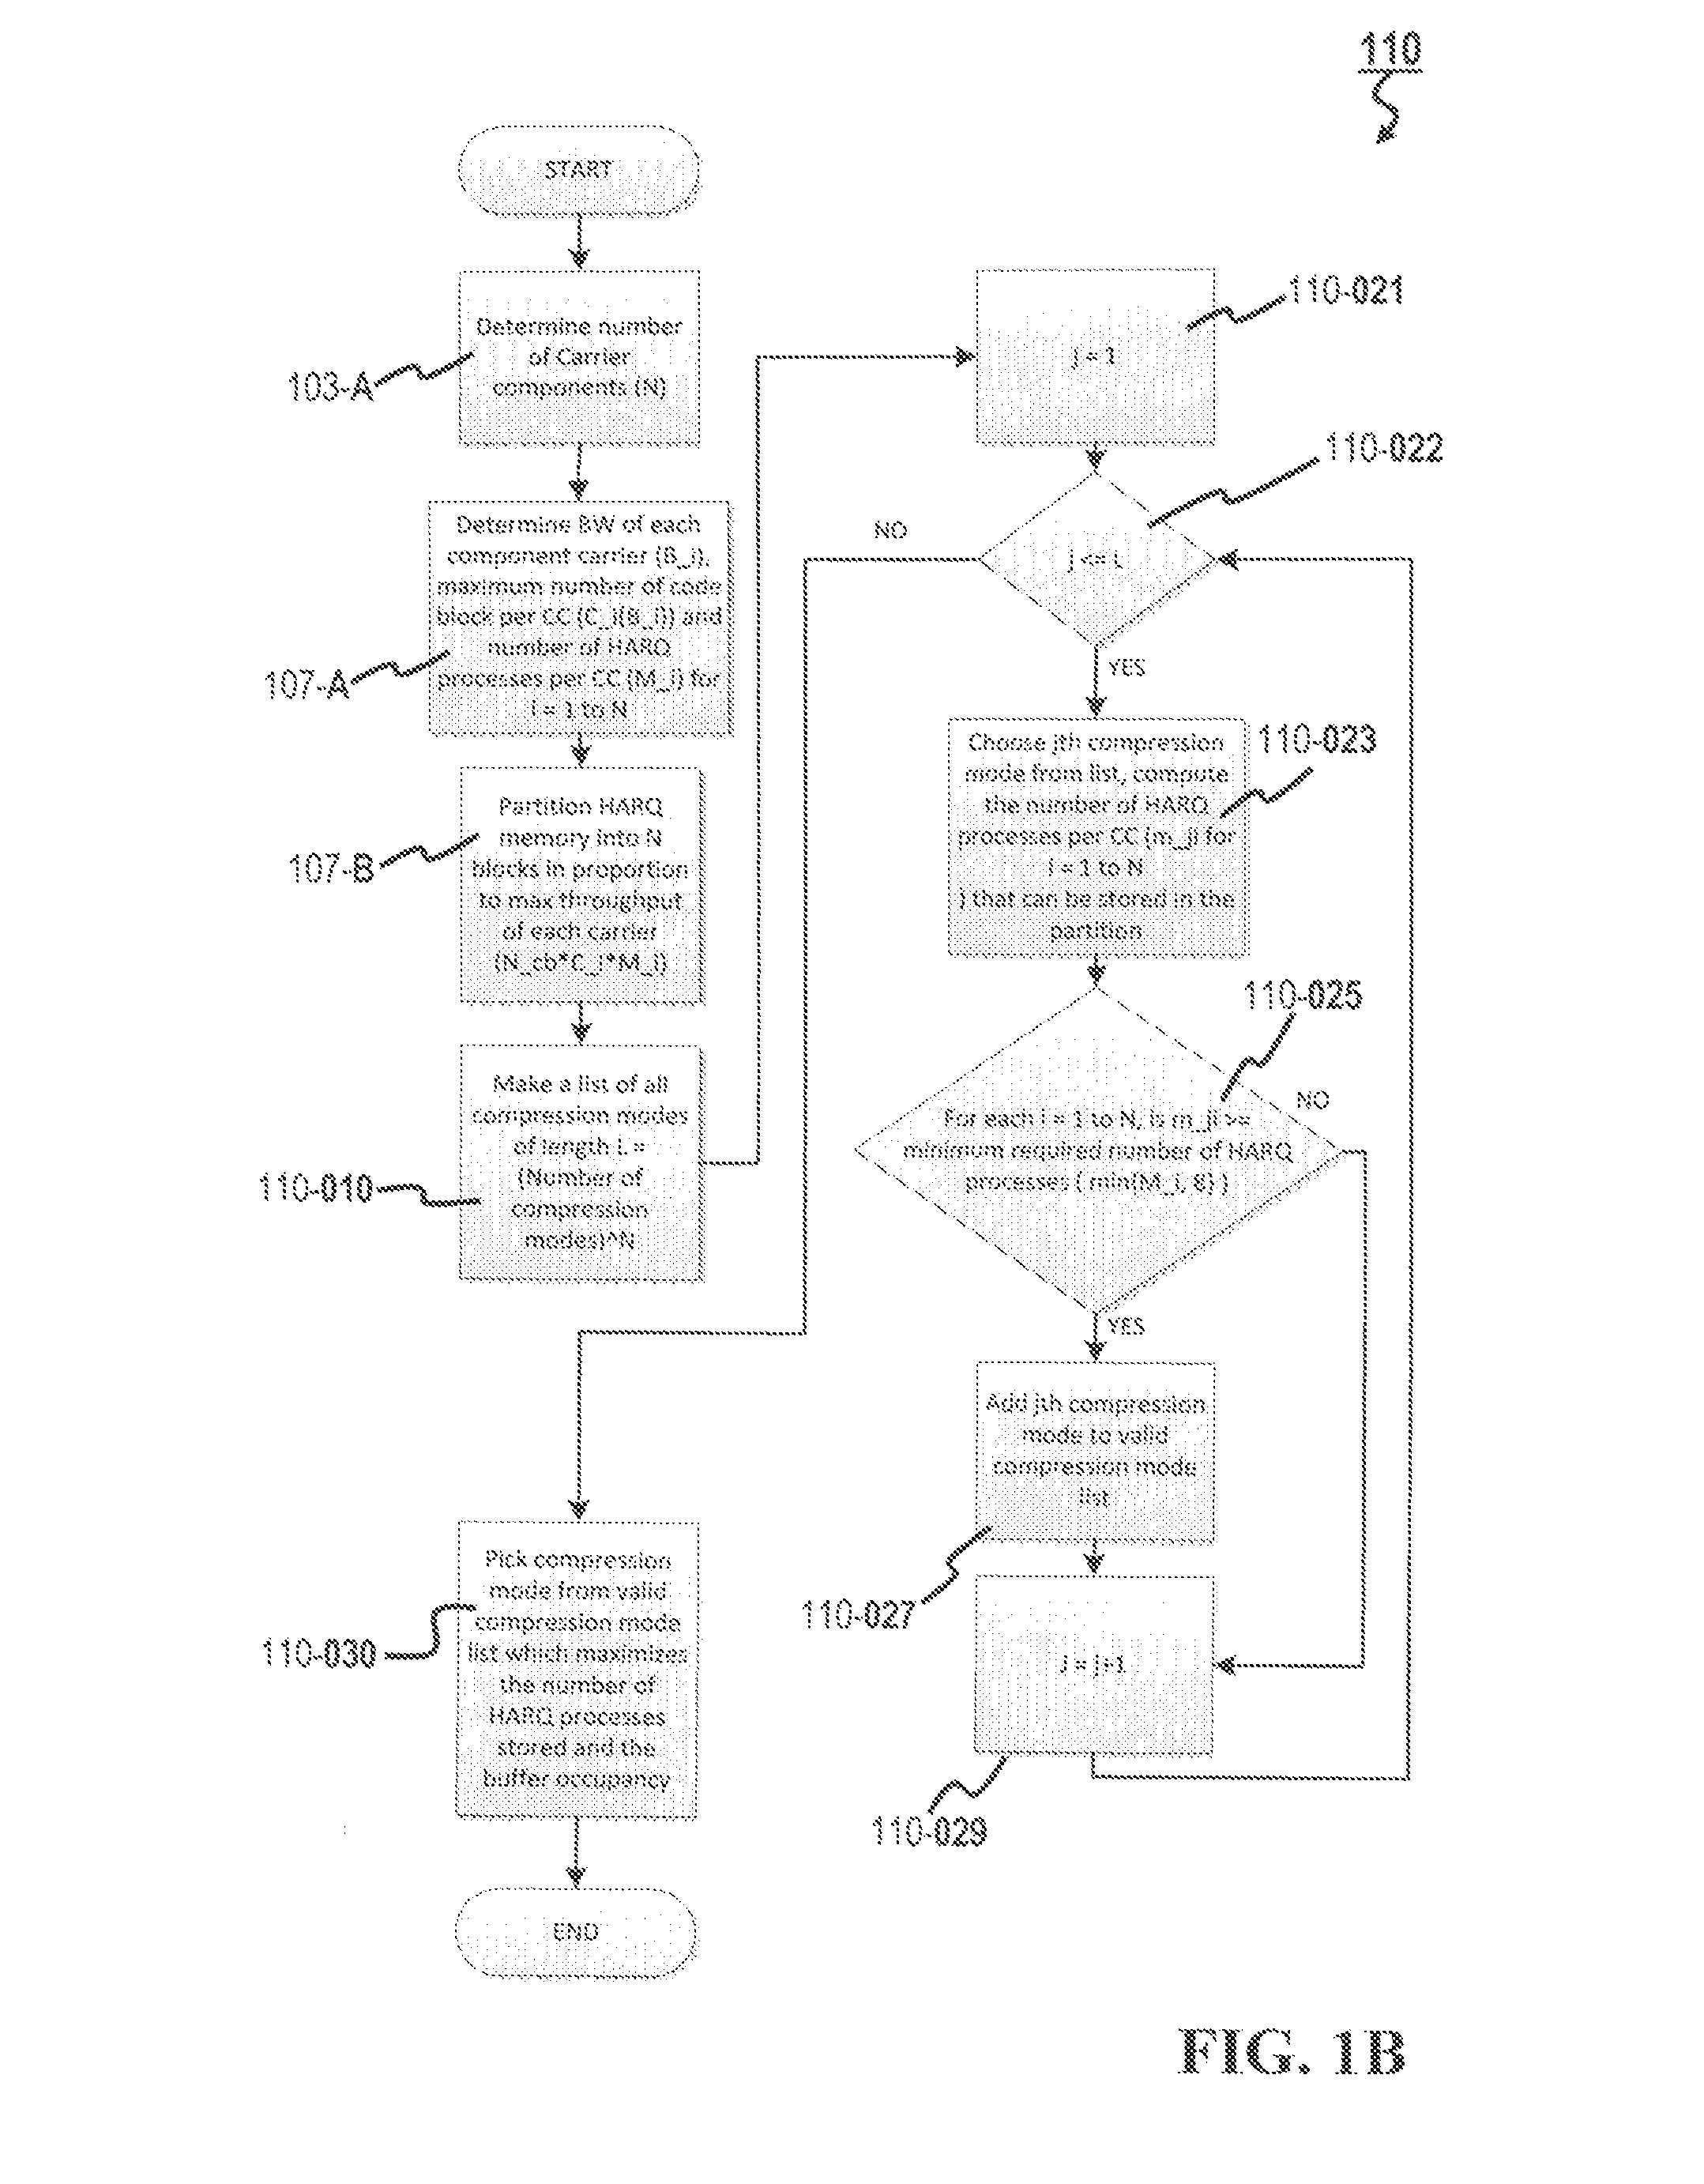 Method and system for contiguous HARQ memory management with memory splitting